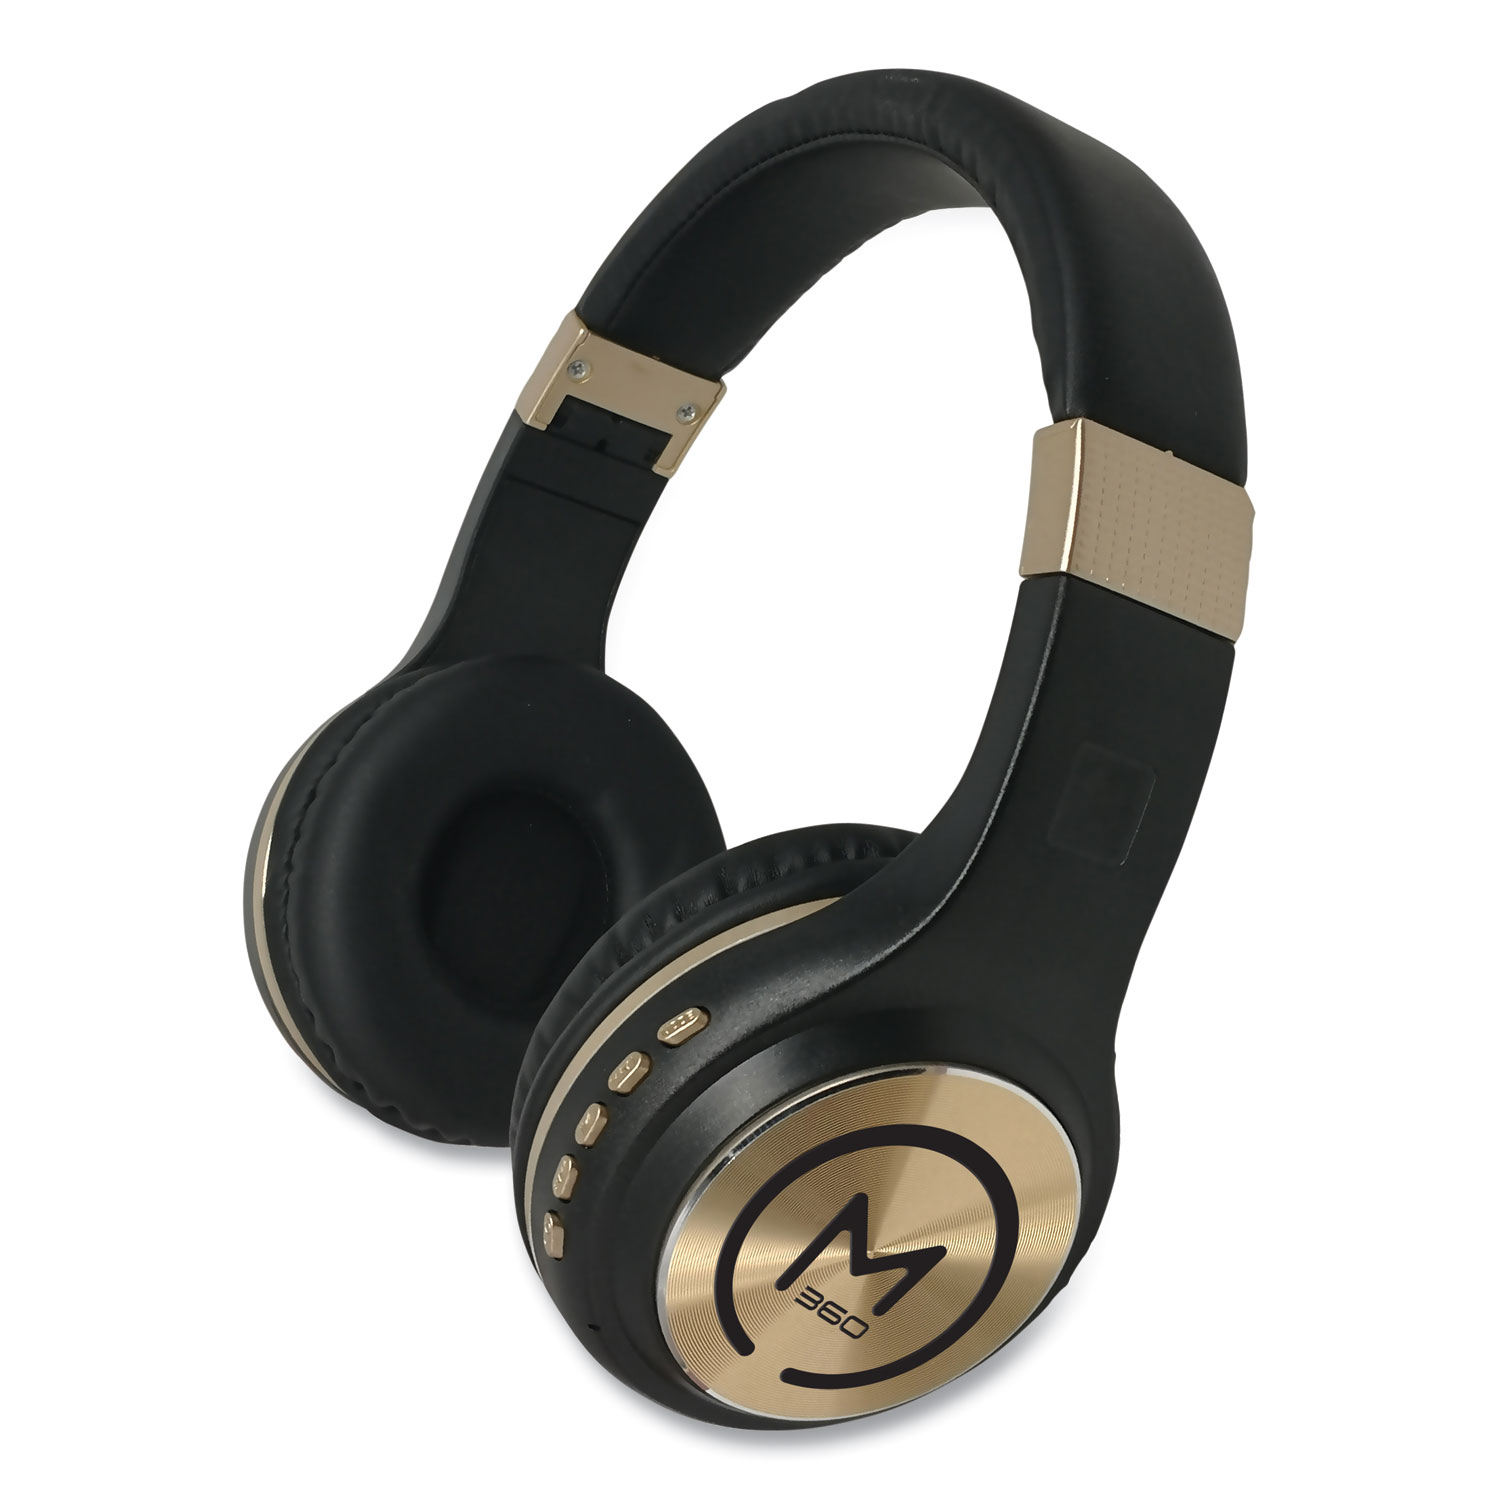 Morpheus 360® SERENITY Stereo Wireless Headphones with Microphone, Black with Gold Accents